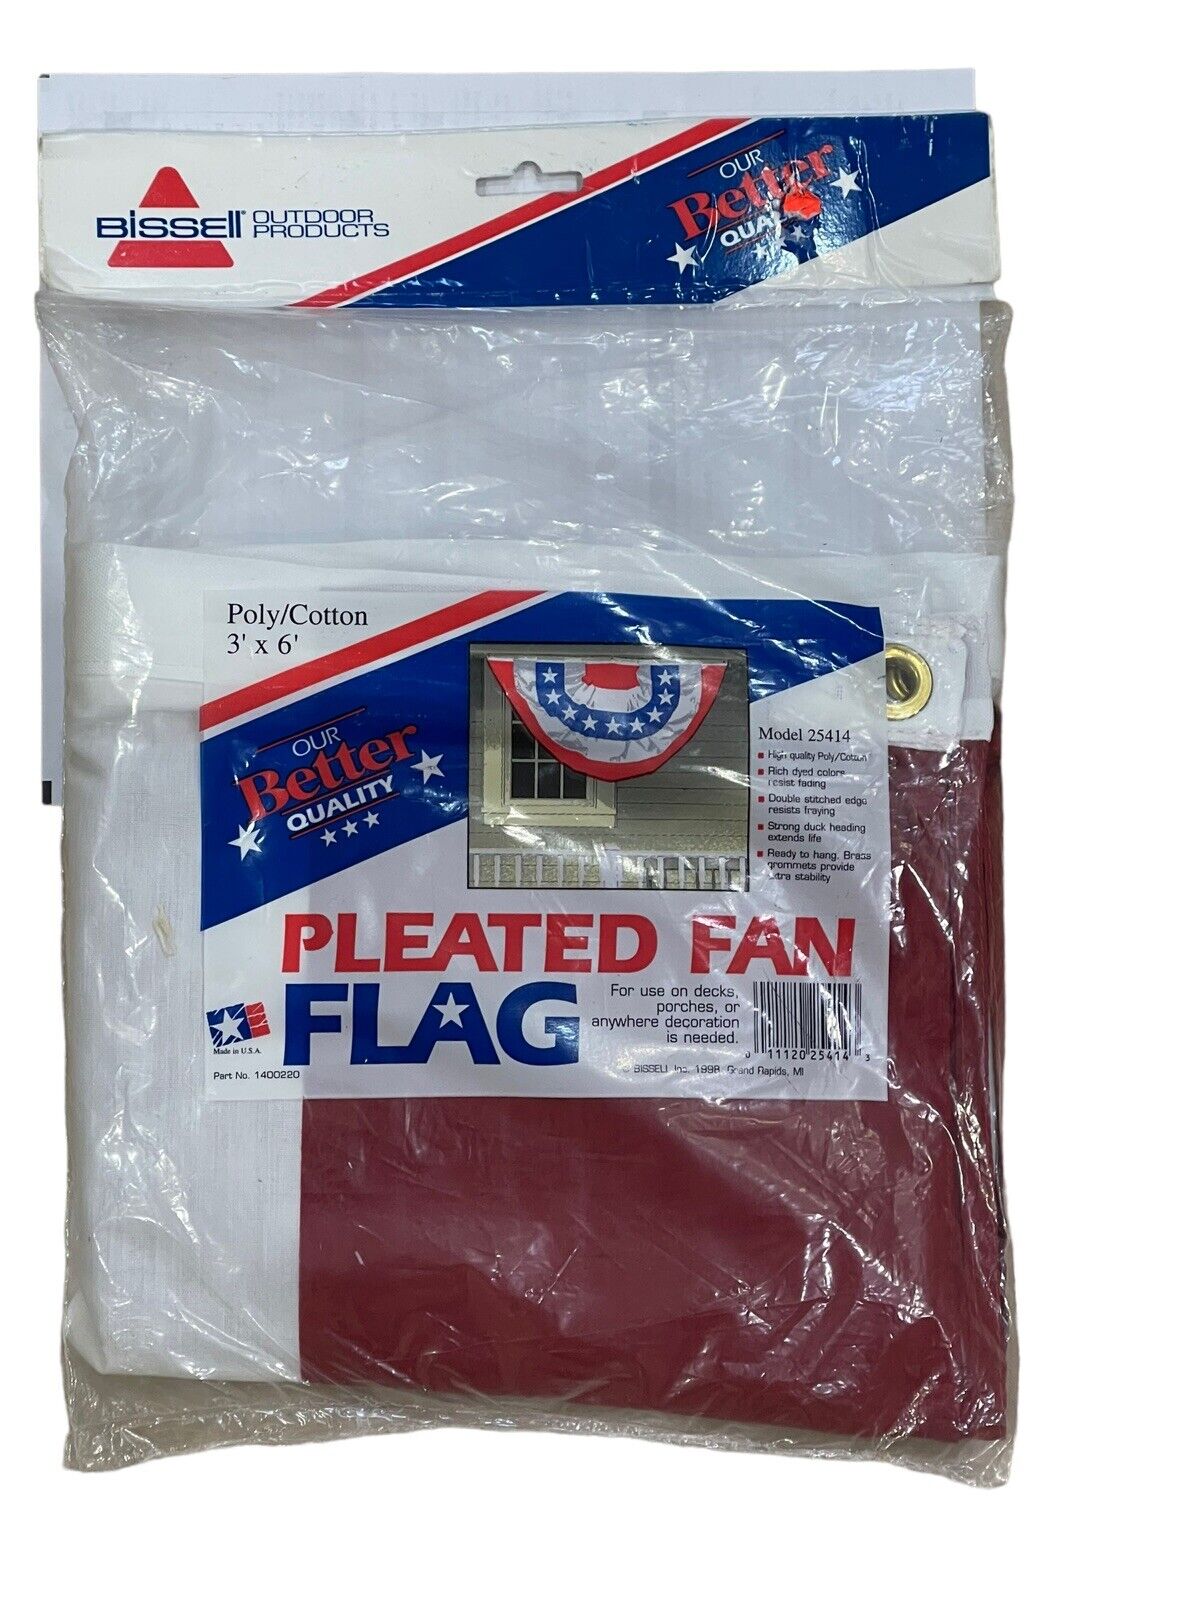 New VTG Pleated Fan Flag 3' x 6' Bissell Outdoor Products 1998 Poly/Cotton 25414